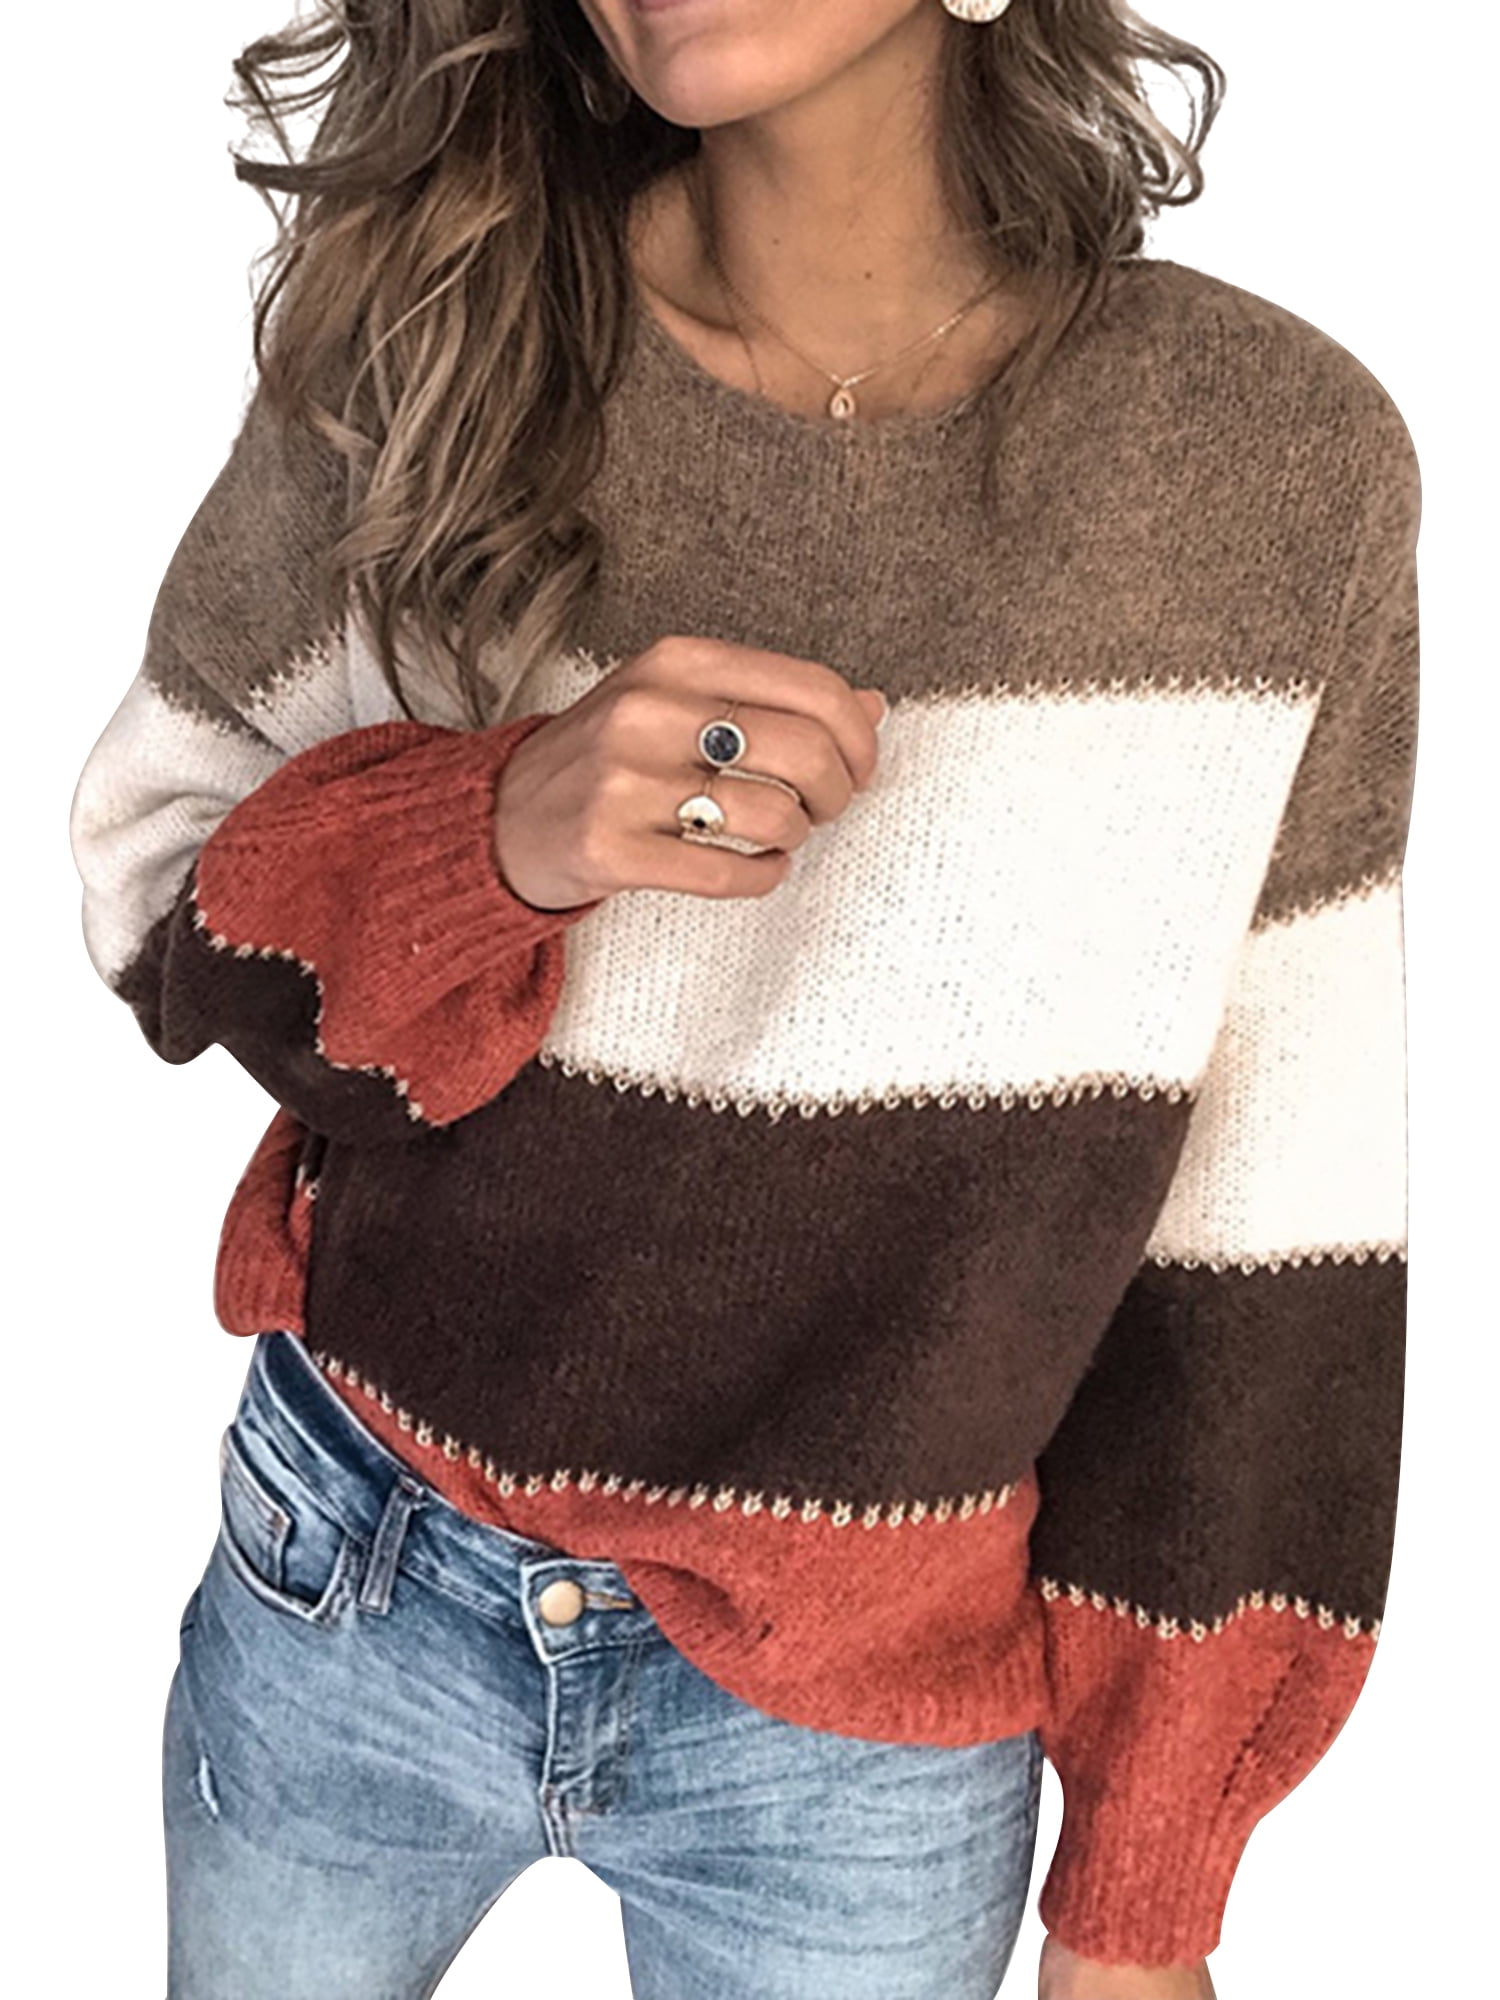 Fashionhe Women One Shoulder Pullover Sweater Autumn Long Sleeve Home Casual Knitted Jumper T-Shirt